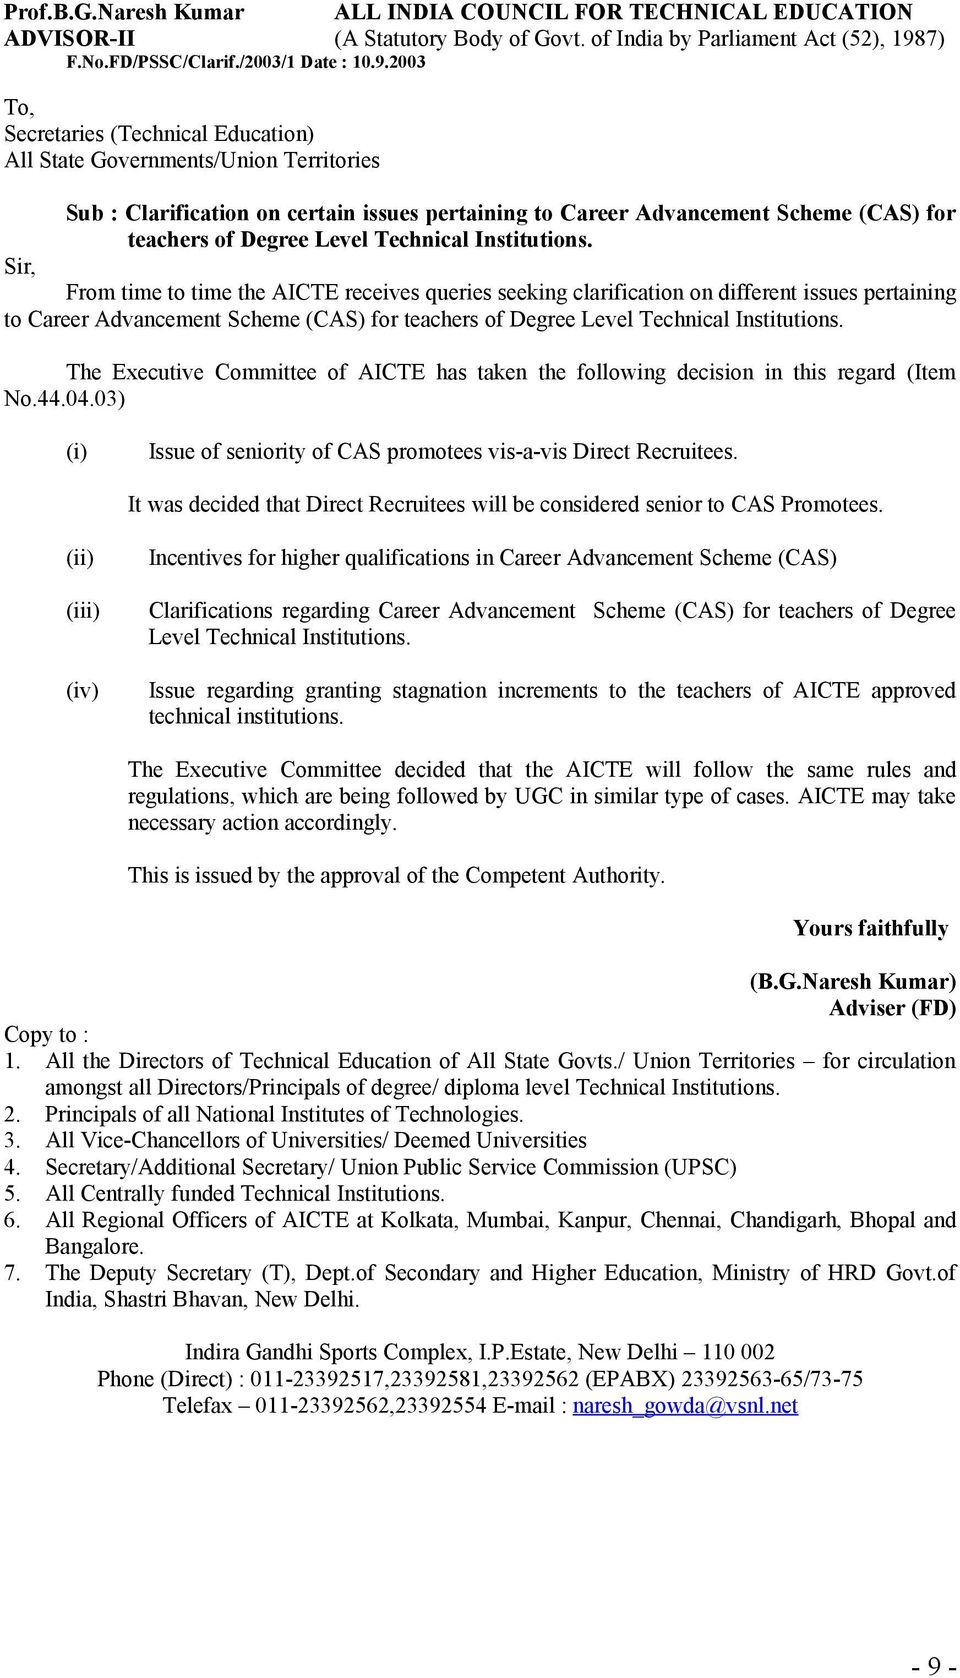 2003 To, Secretaries (Technical Education) All State Governments/Union Territories Sub : Clarification on certain issues pertaining to Career Advancement Scheme (CAS) for teachers of Degree Level